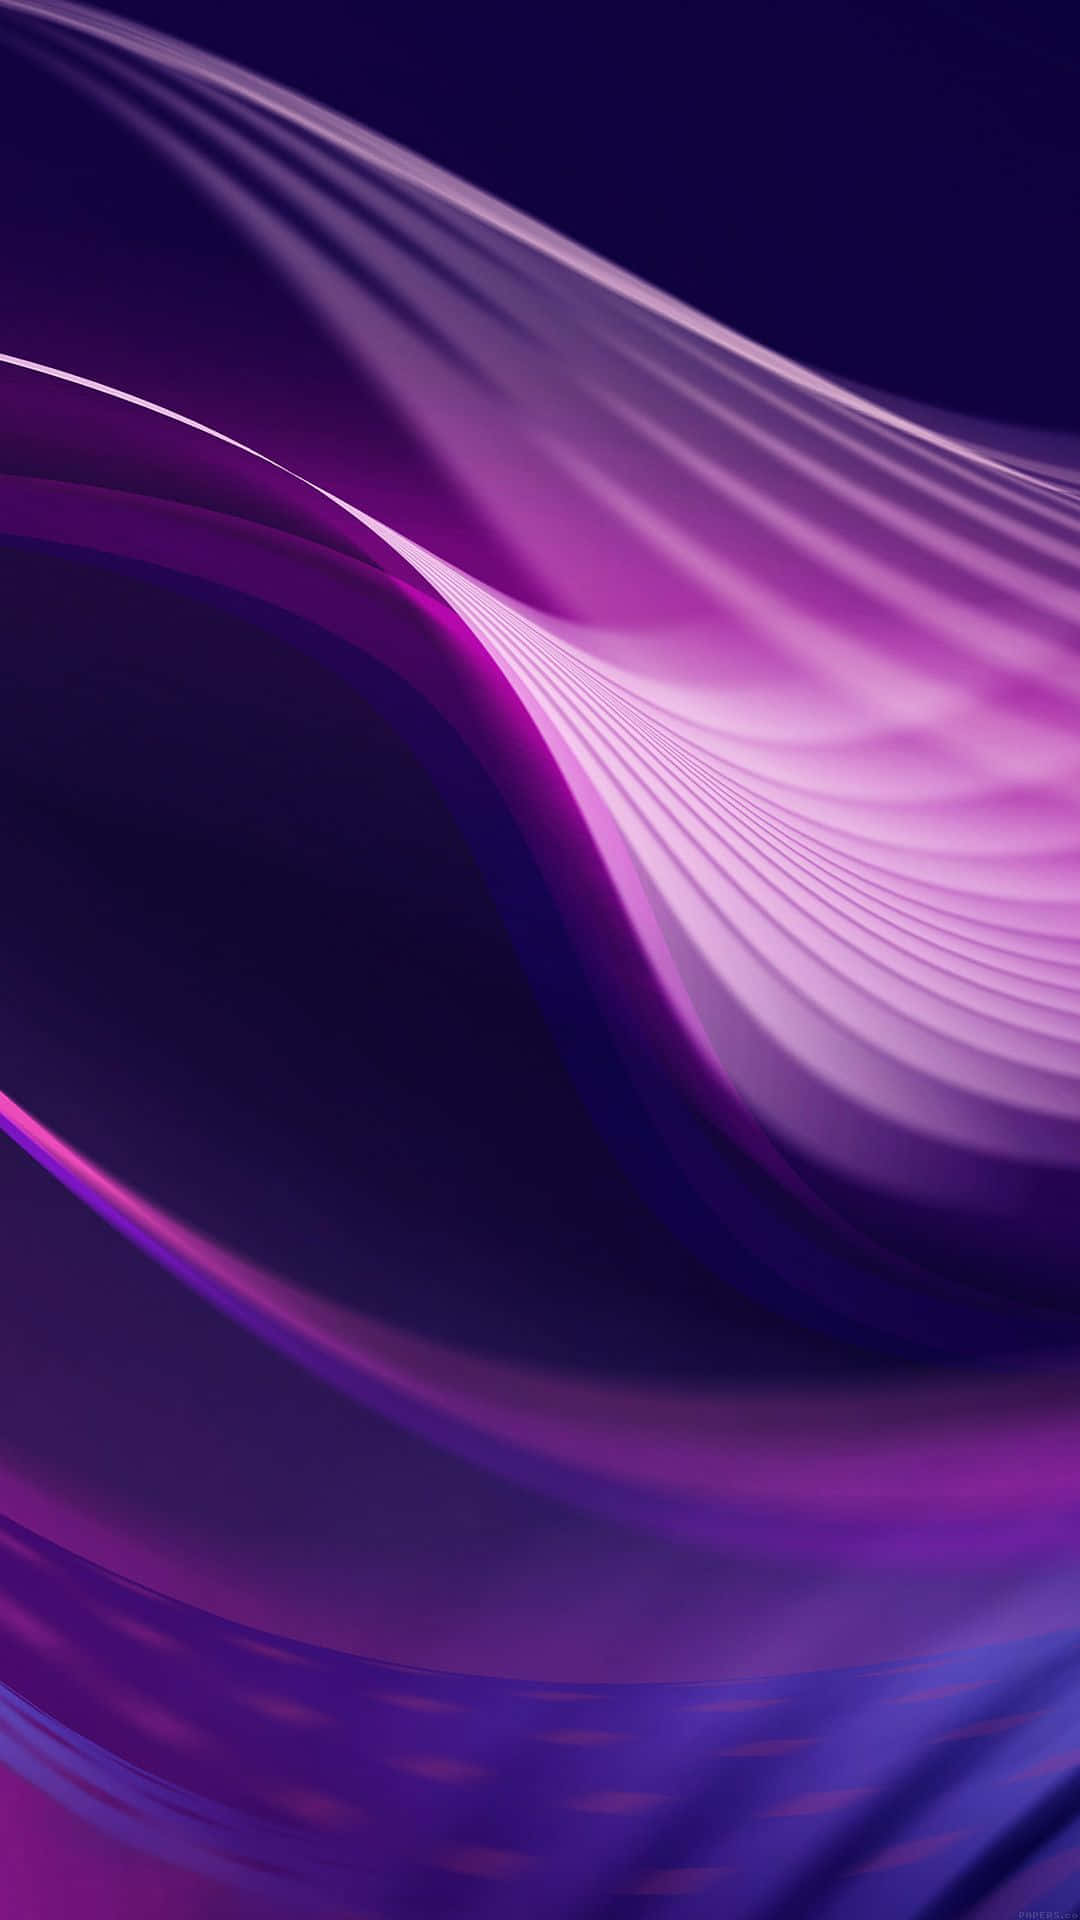 A Purple And Blue Abstract Background With Waves Wallpaper